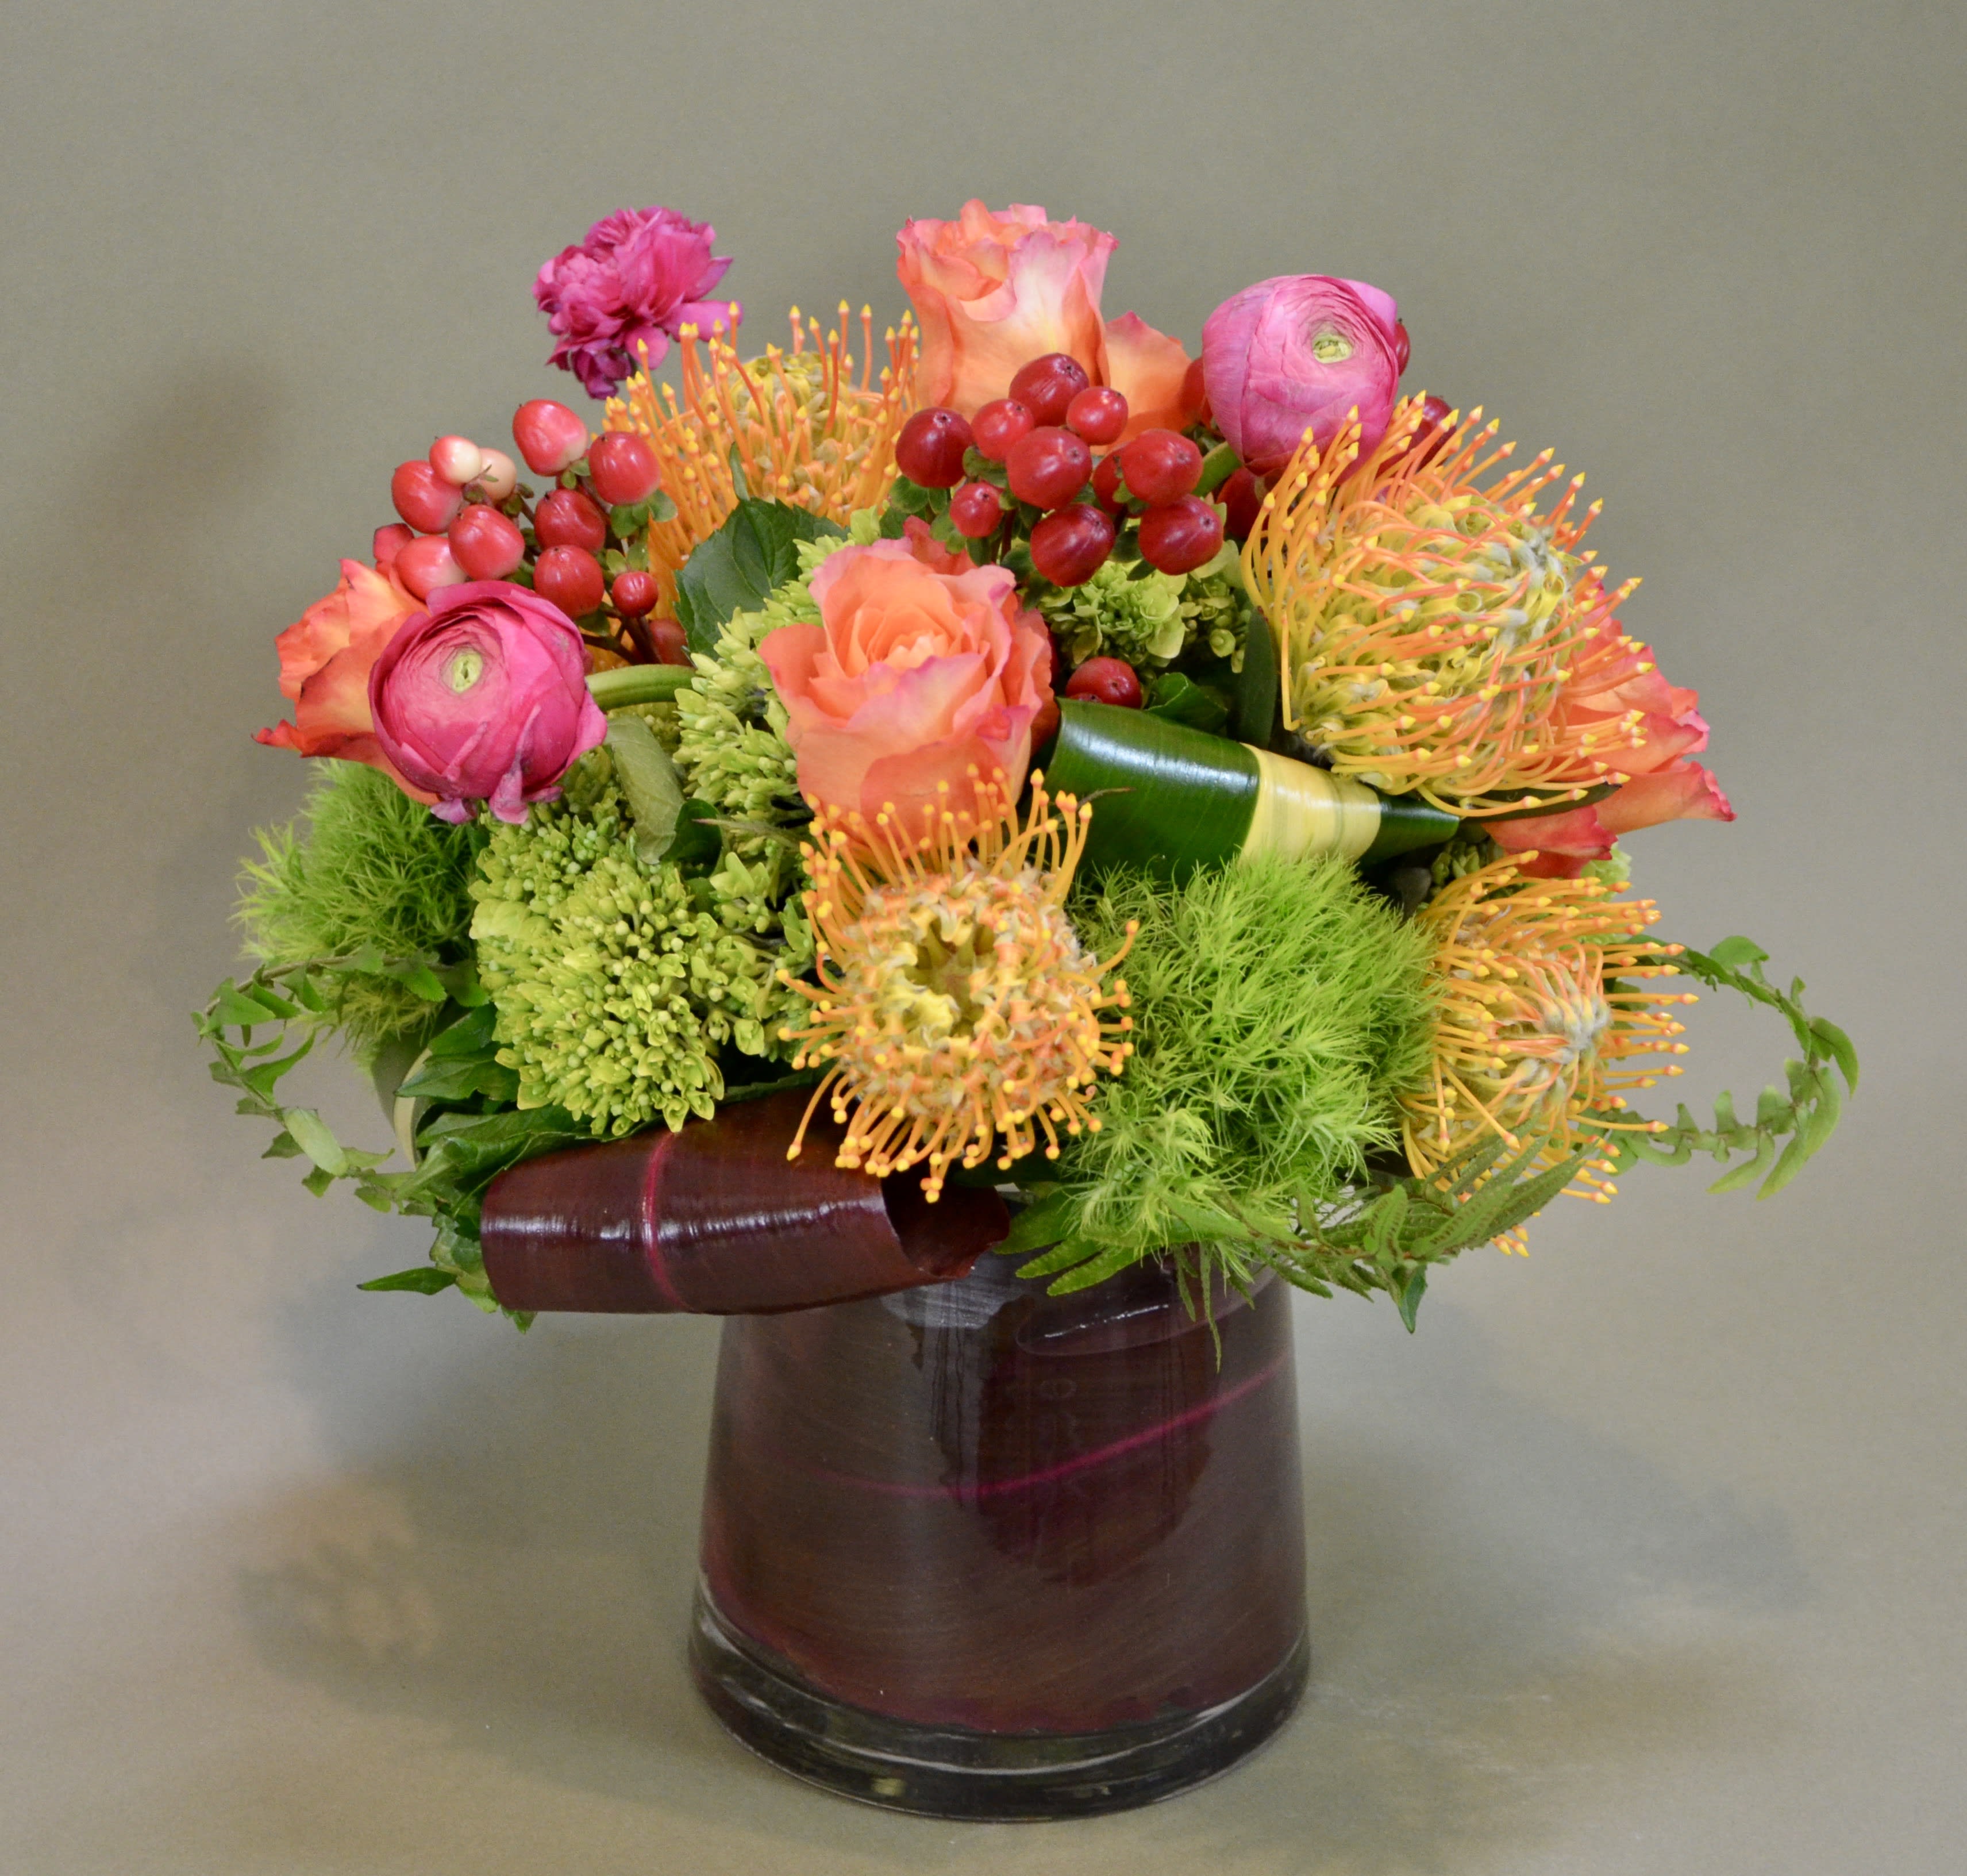 Fall Harvest - A seasonal collection of orange, red, green and hot pink to welcome the new season. 